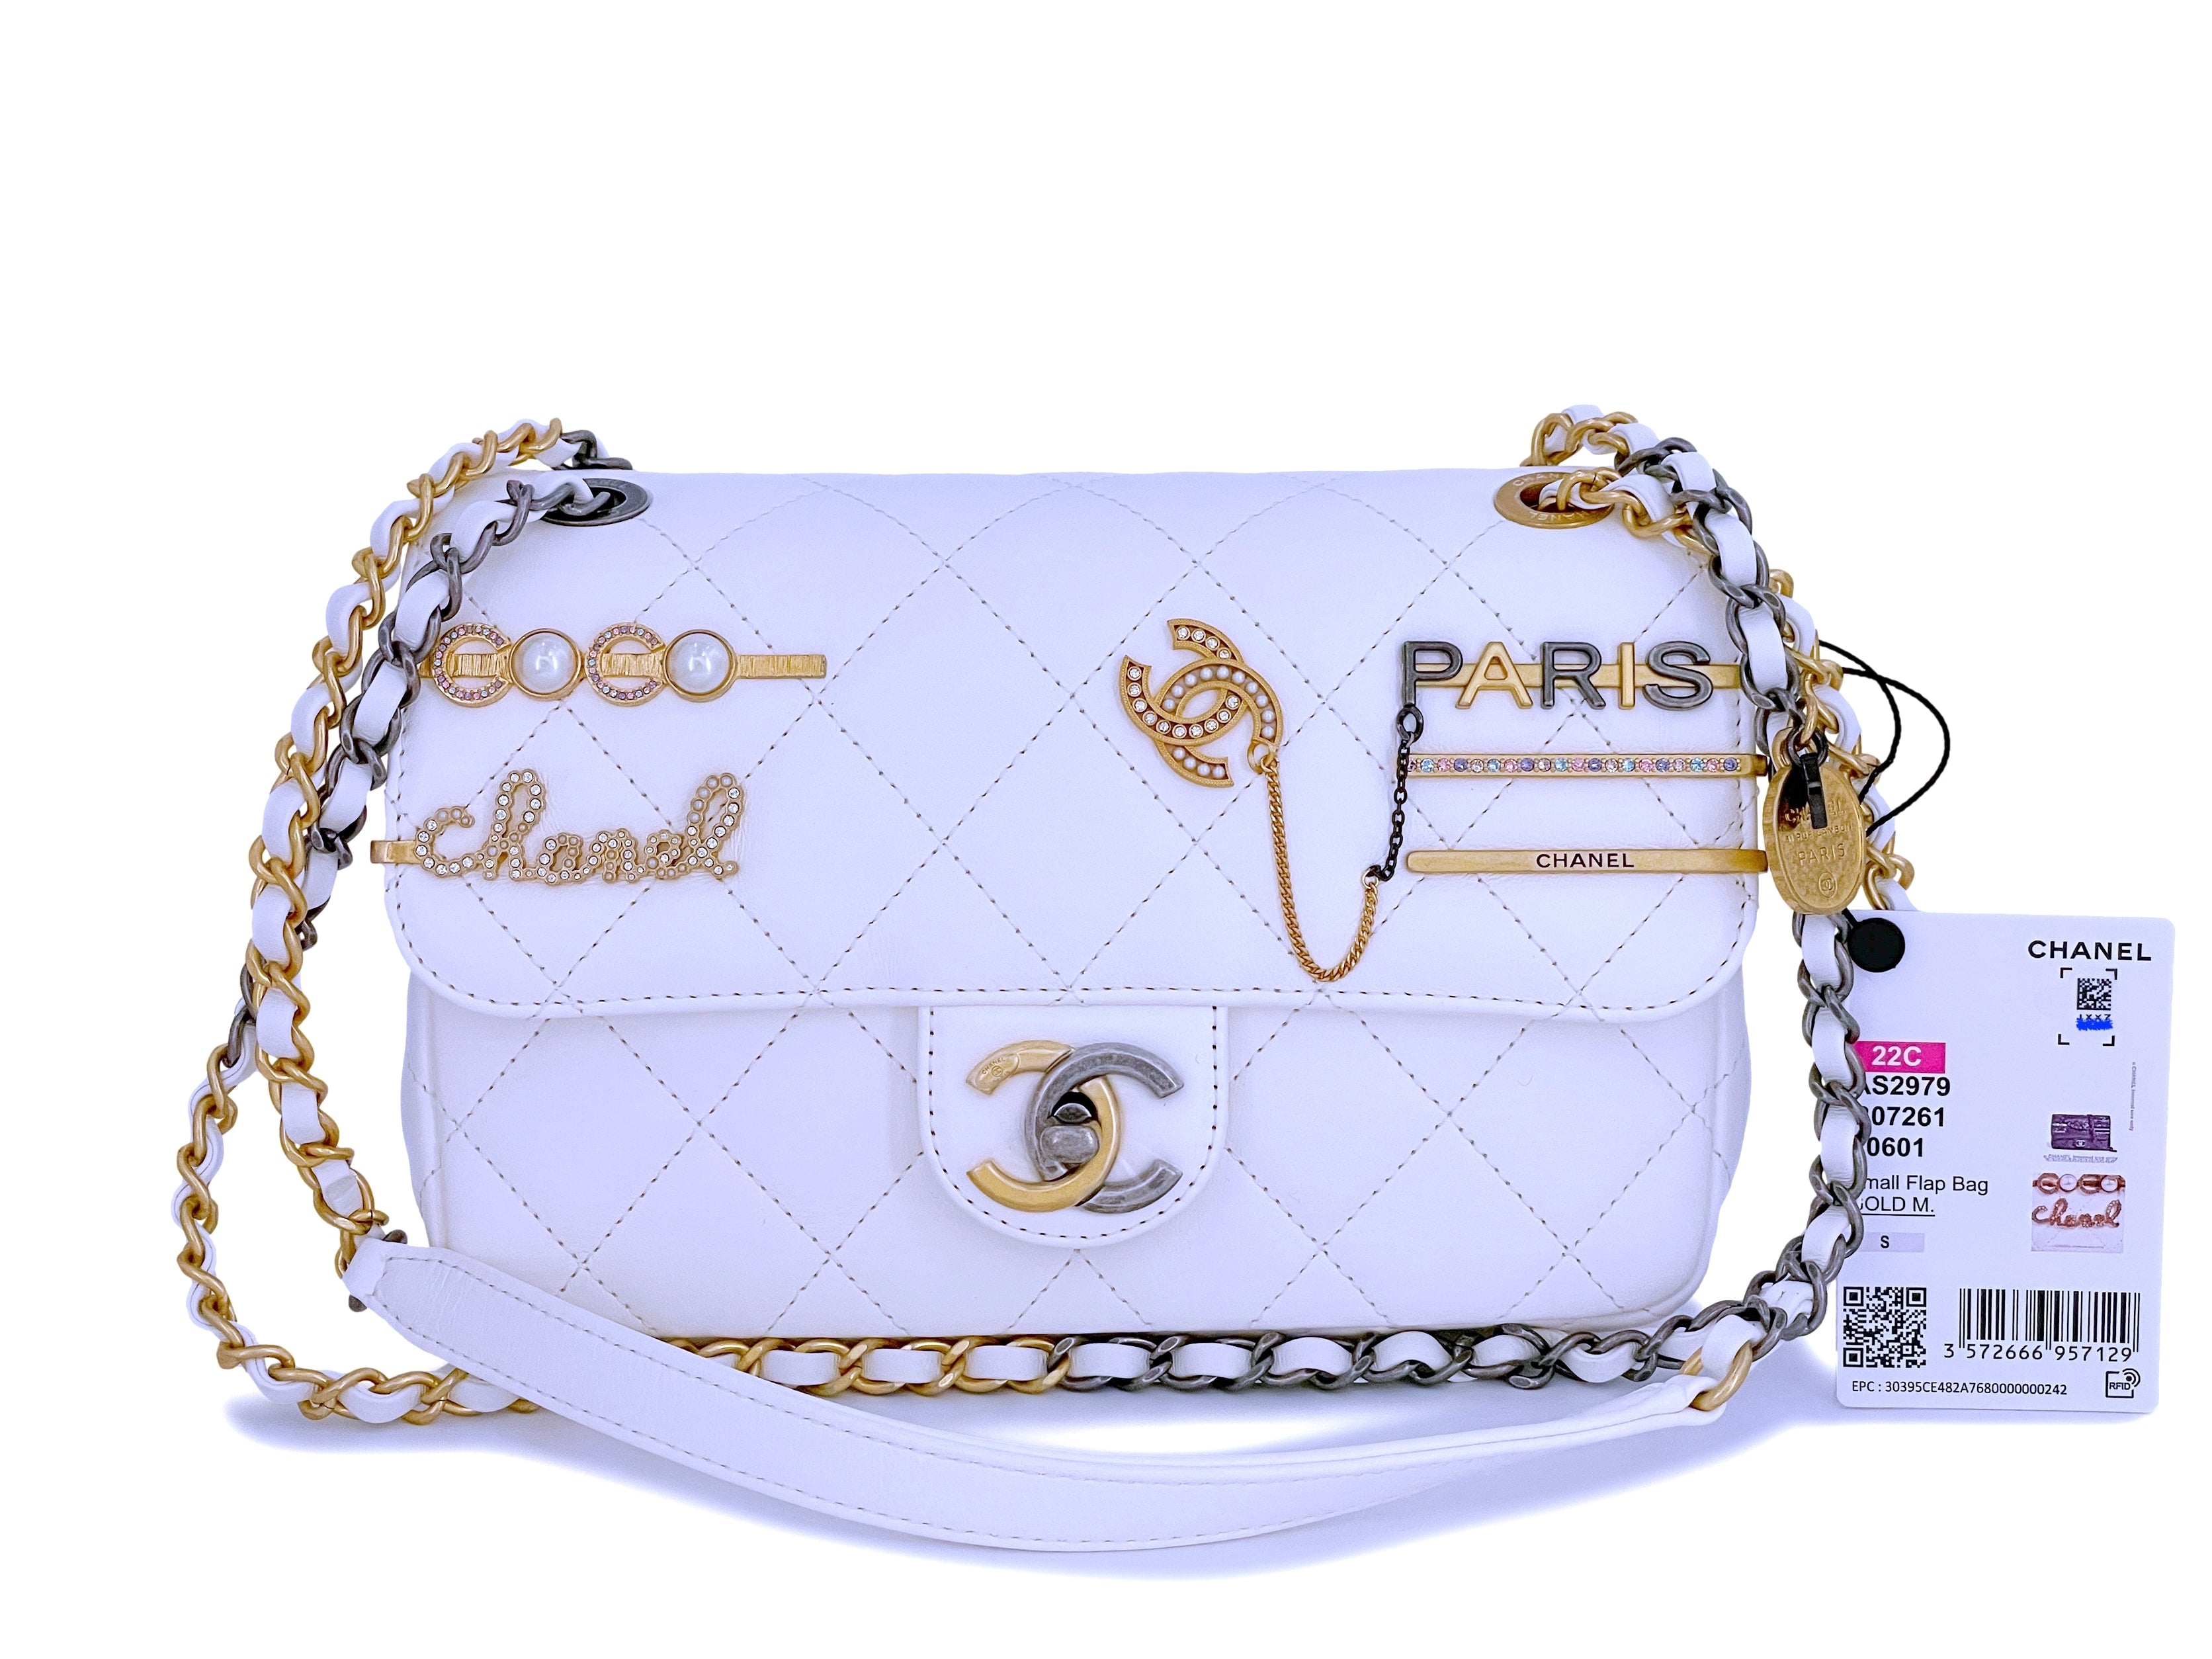 Chanel Black, White, And Rainbow Tweed 22 Tote Aged Gold Hardware